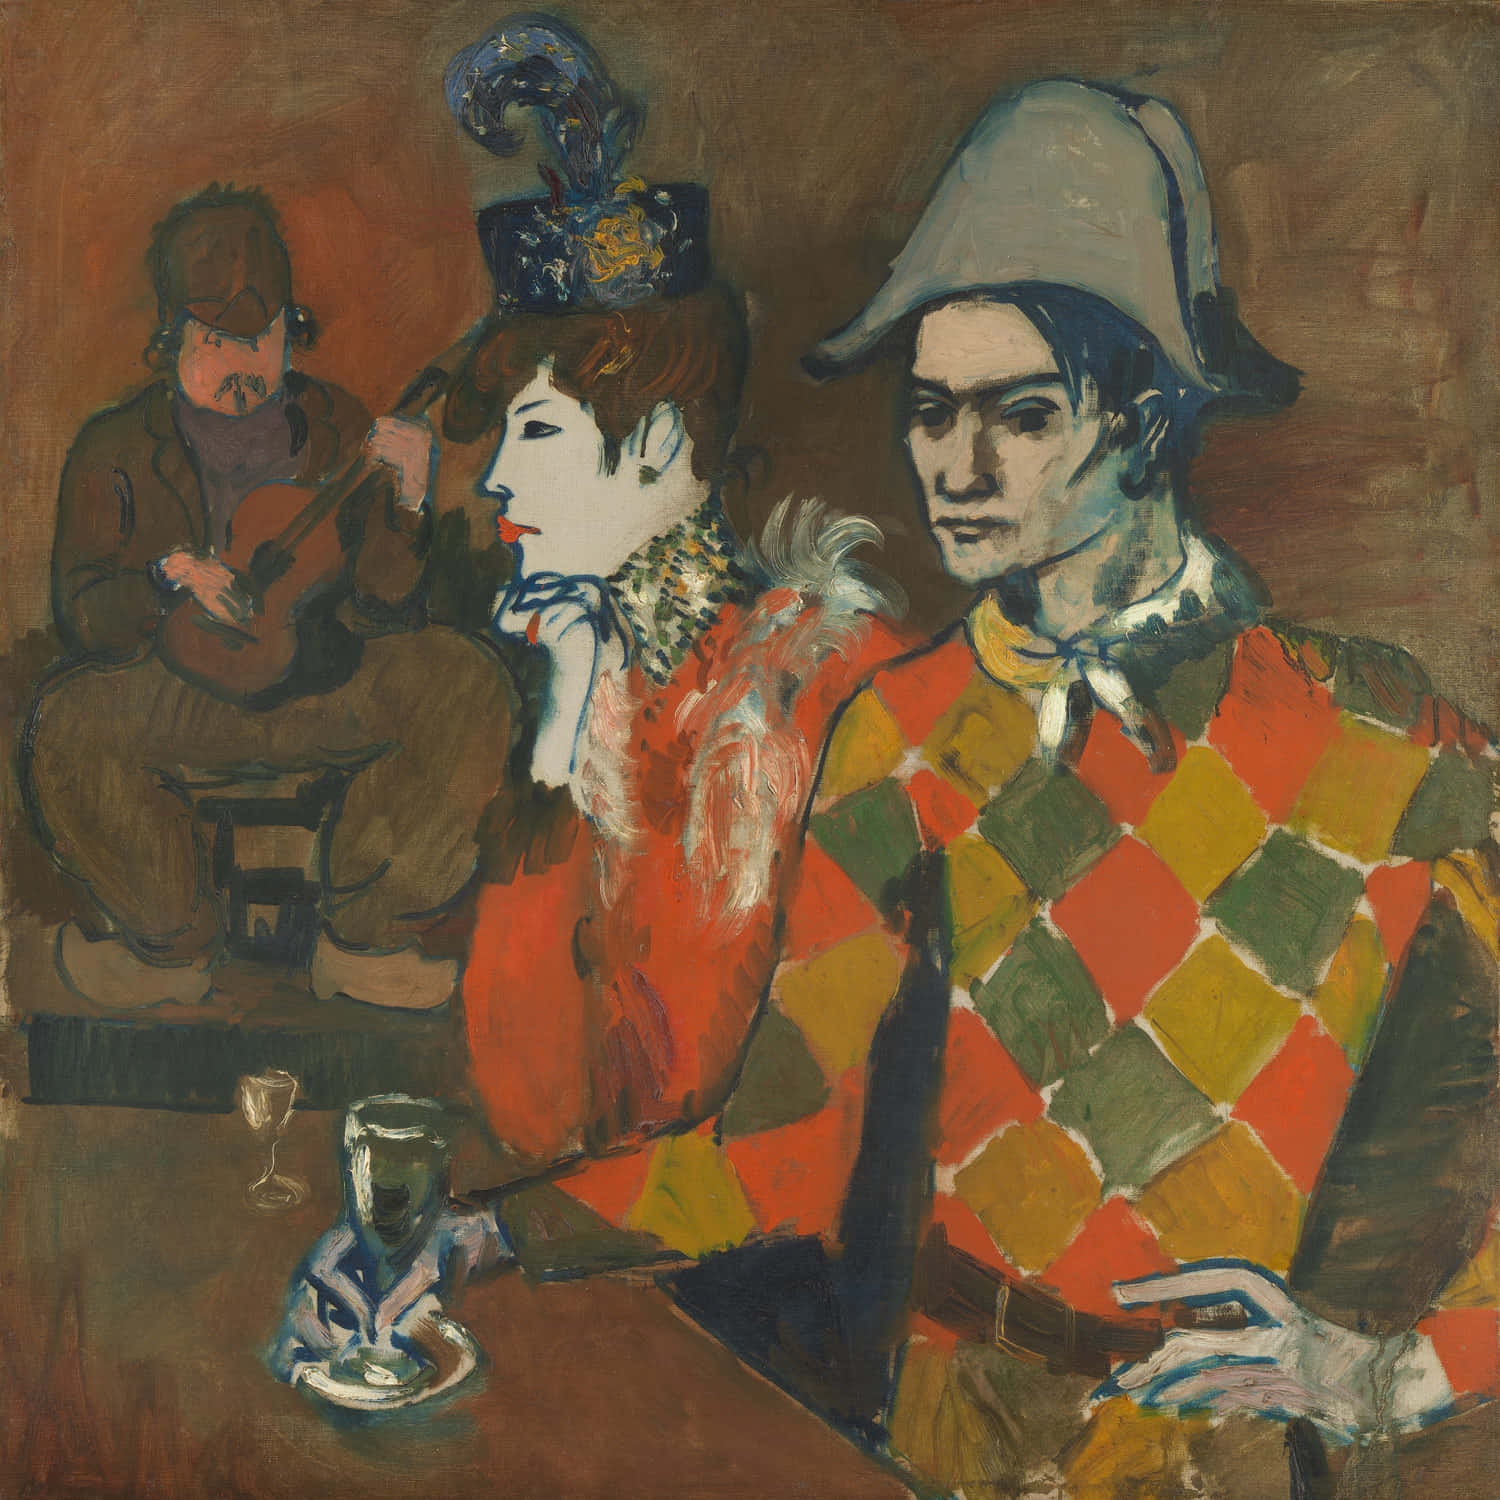 A Painting Of Two People Sitting At A Table